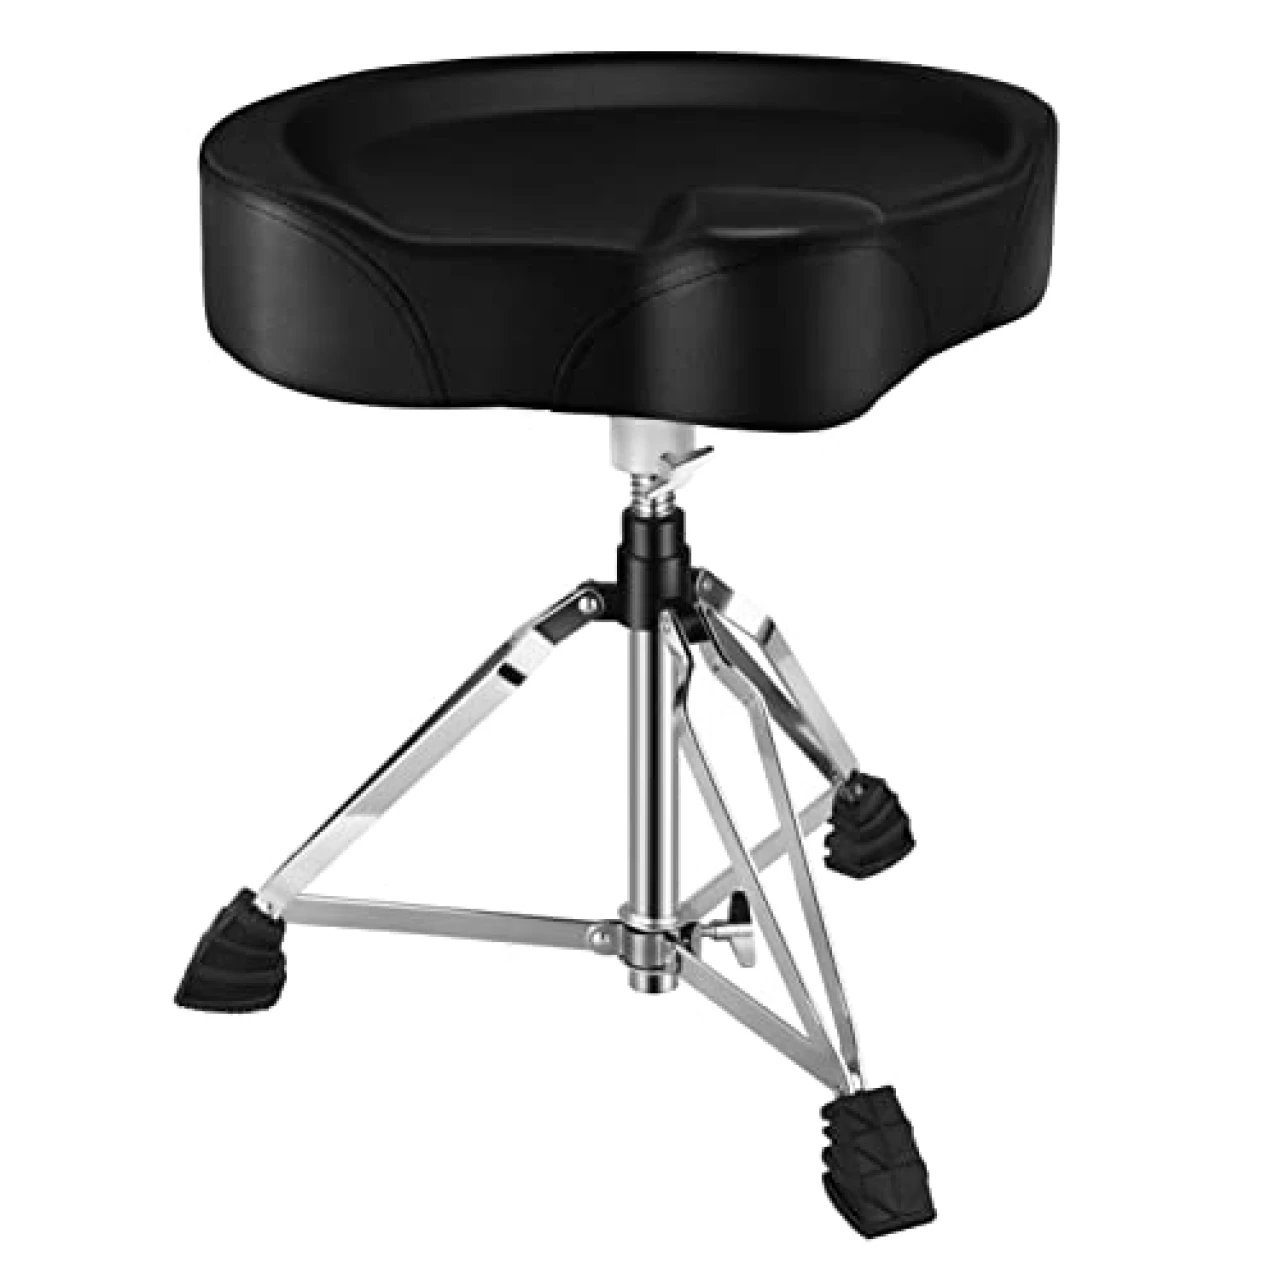 Donner Heavy Duty Drum Throne, Motorcycle Style Drum Seat, Widened Drum Chair with Upgraded Materials, Height Adjustable Padded Stool, Double Braced